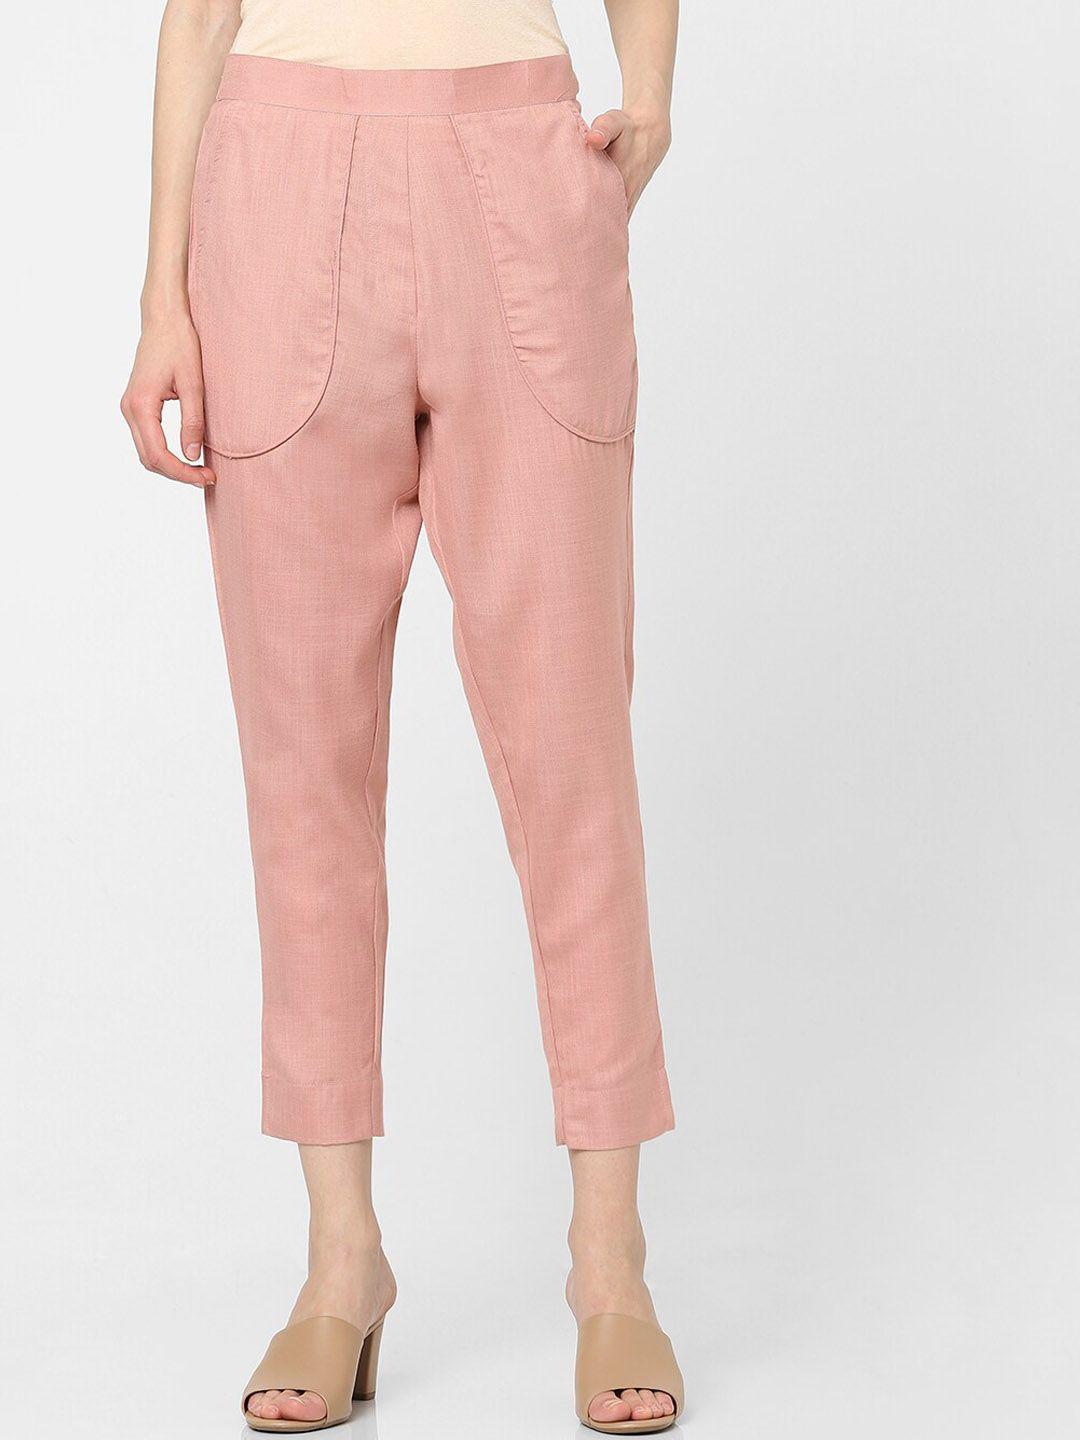 indifusion women pink high-rise pleated culottes trousers